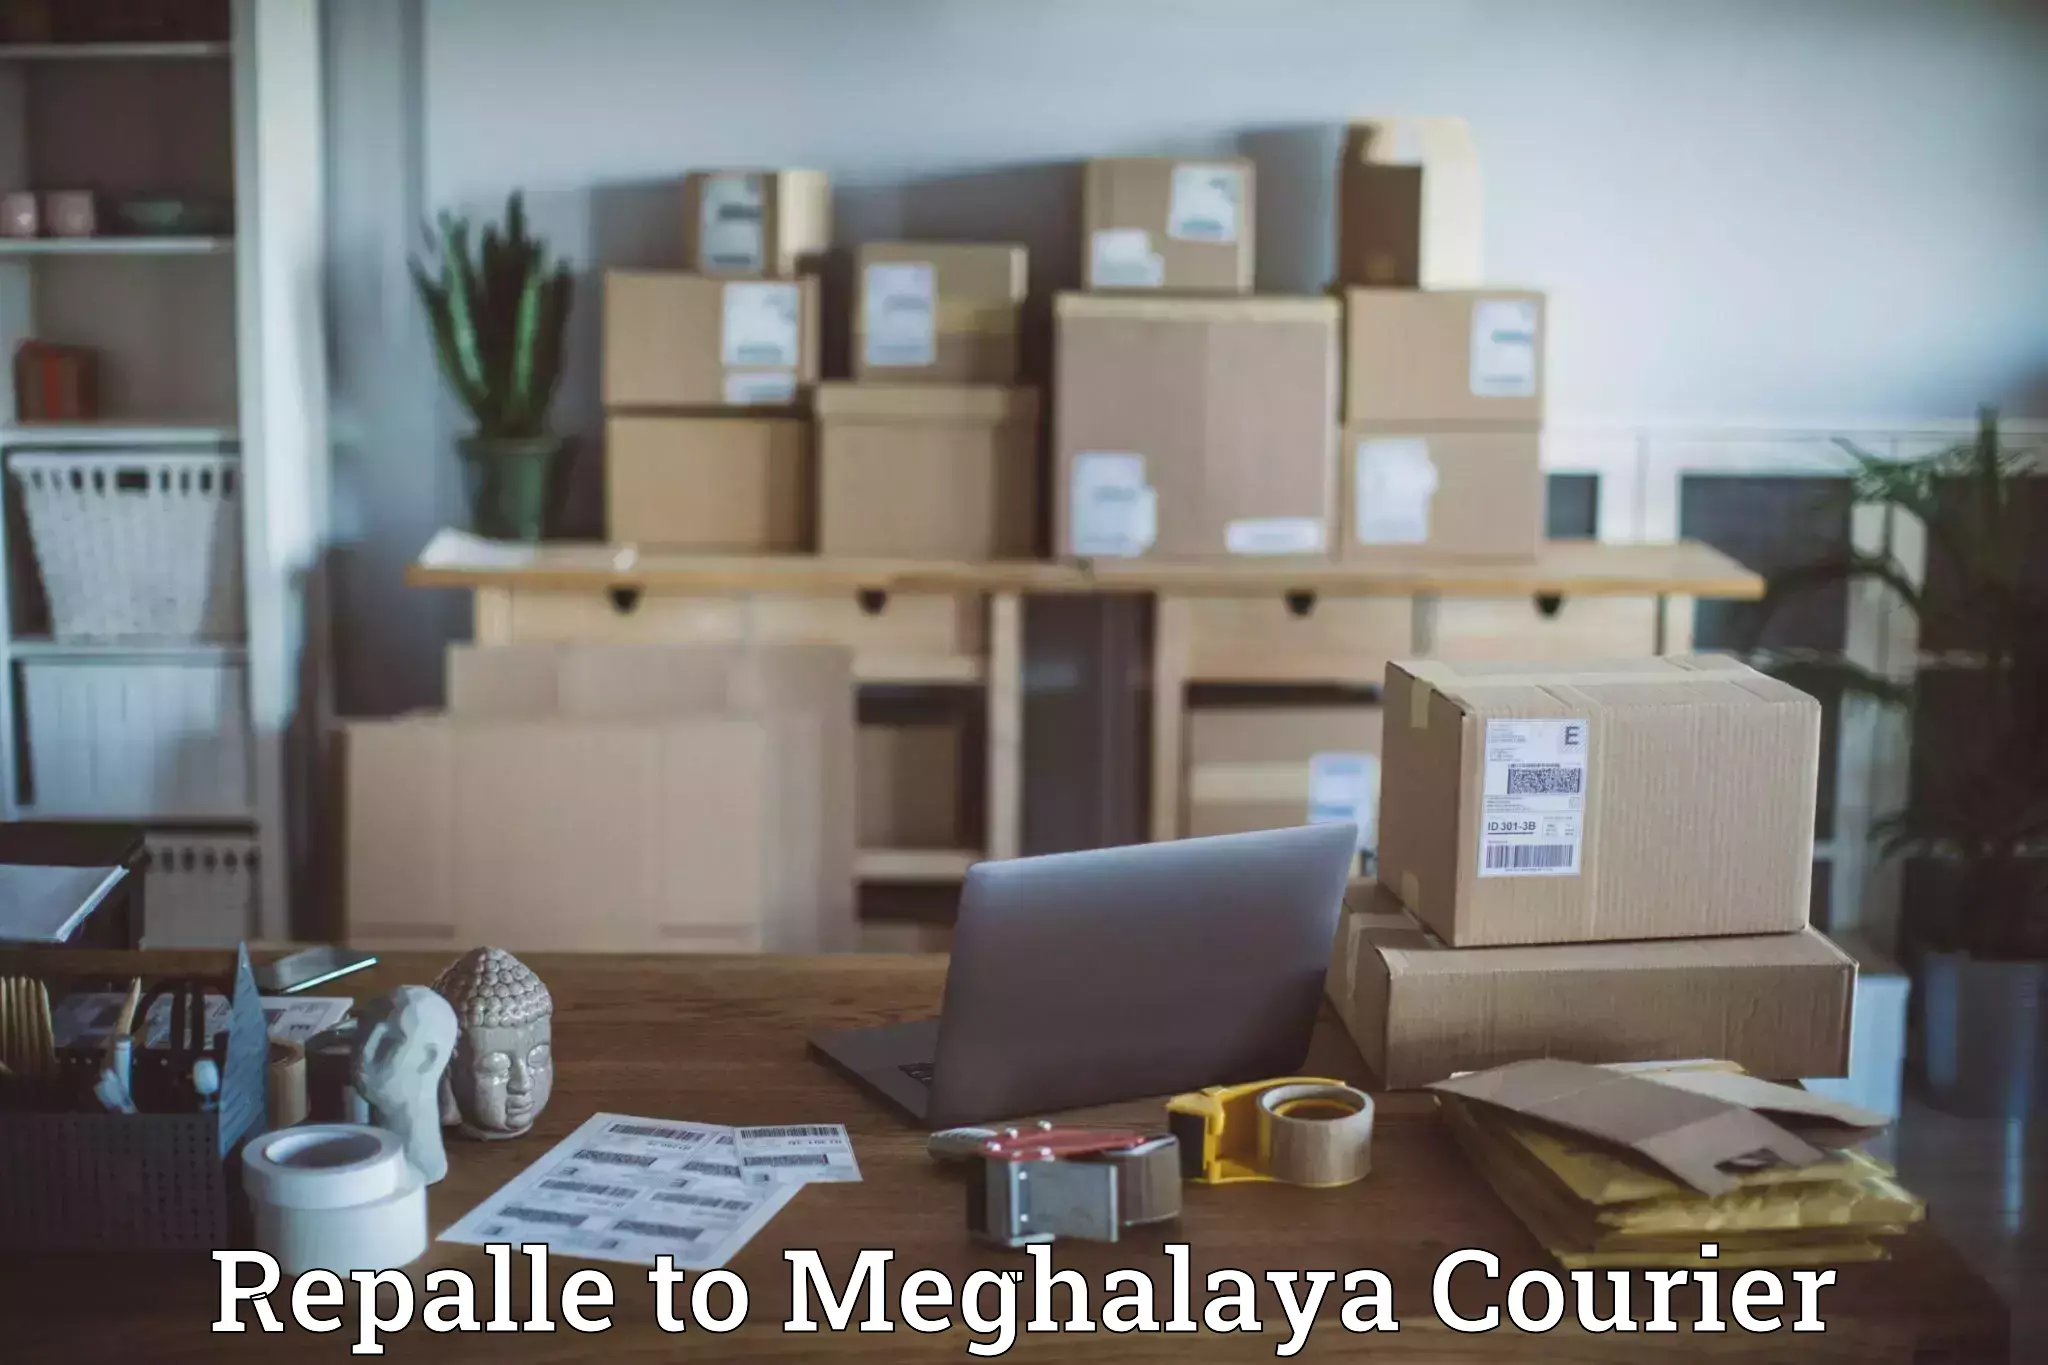 Large package courier Repalle to Meghalaya